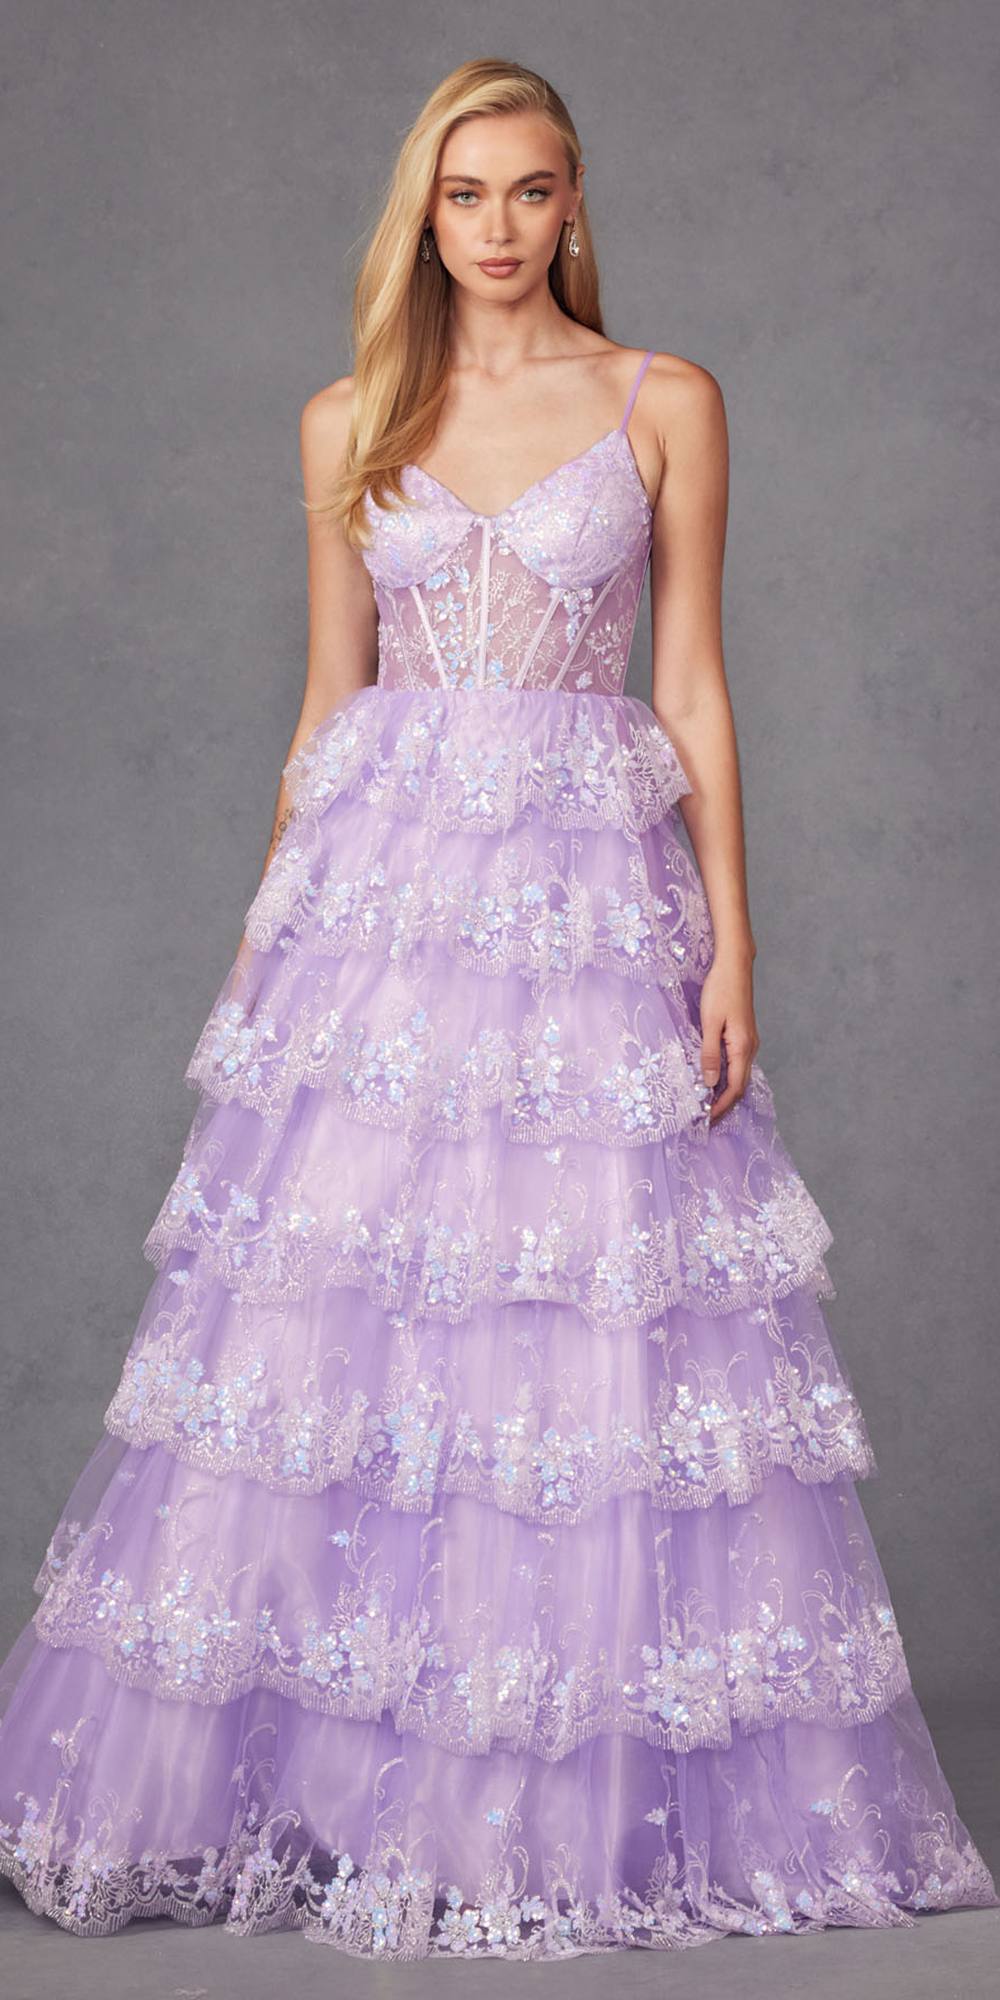 Juliet JT2454K Long Boned Bodice Tiered Layered Sequin Detail A-Line Gown